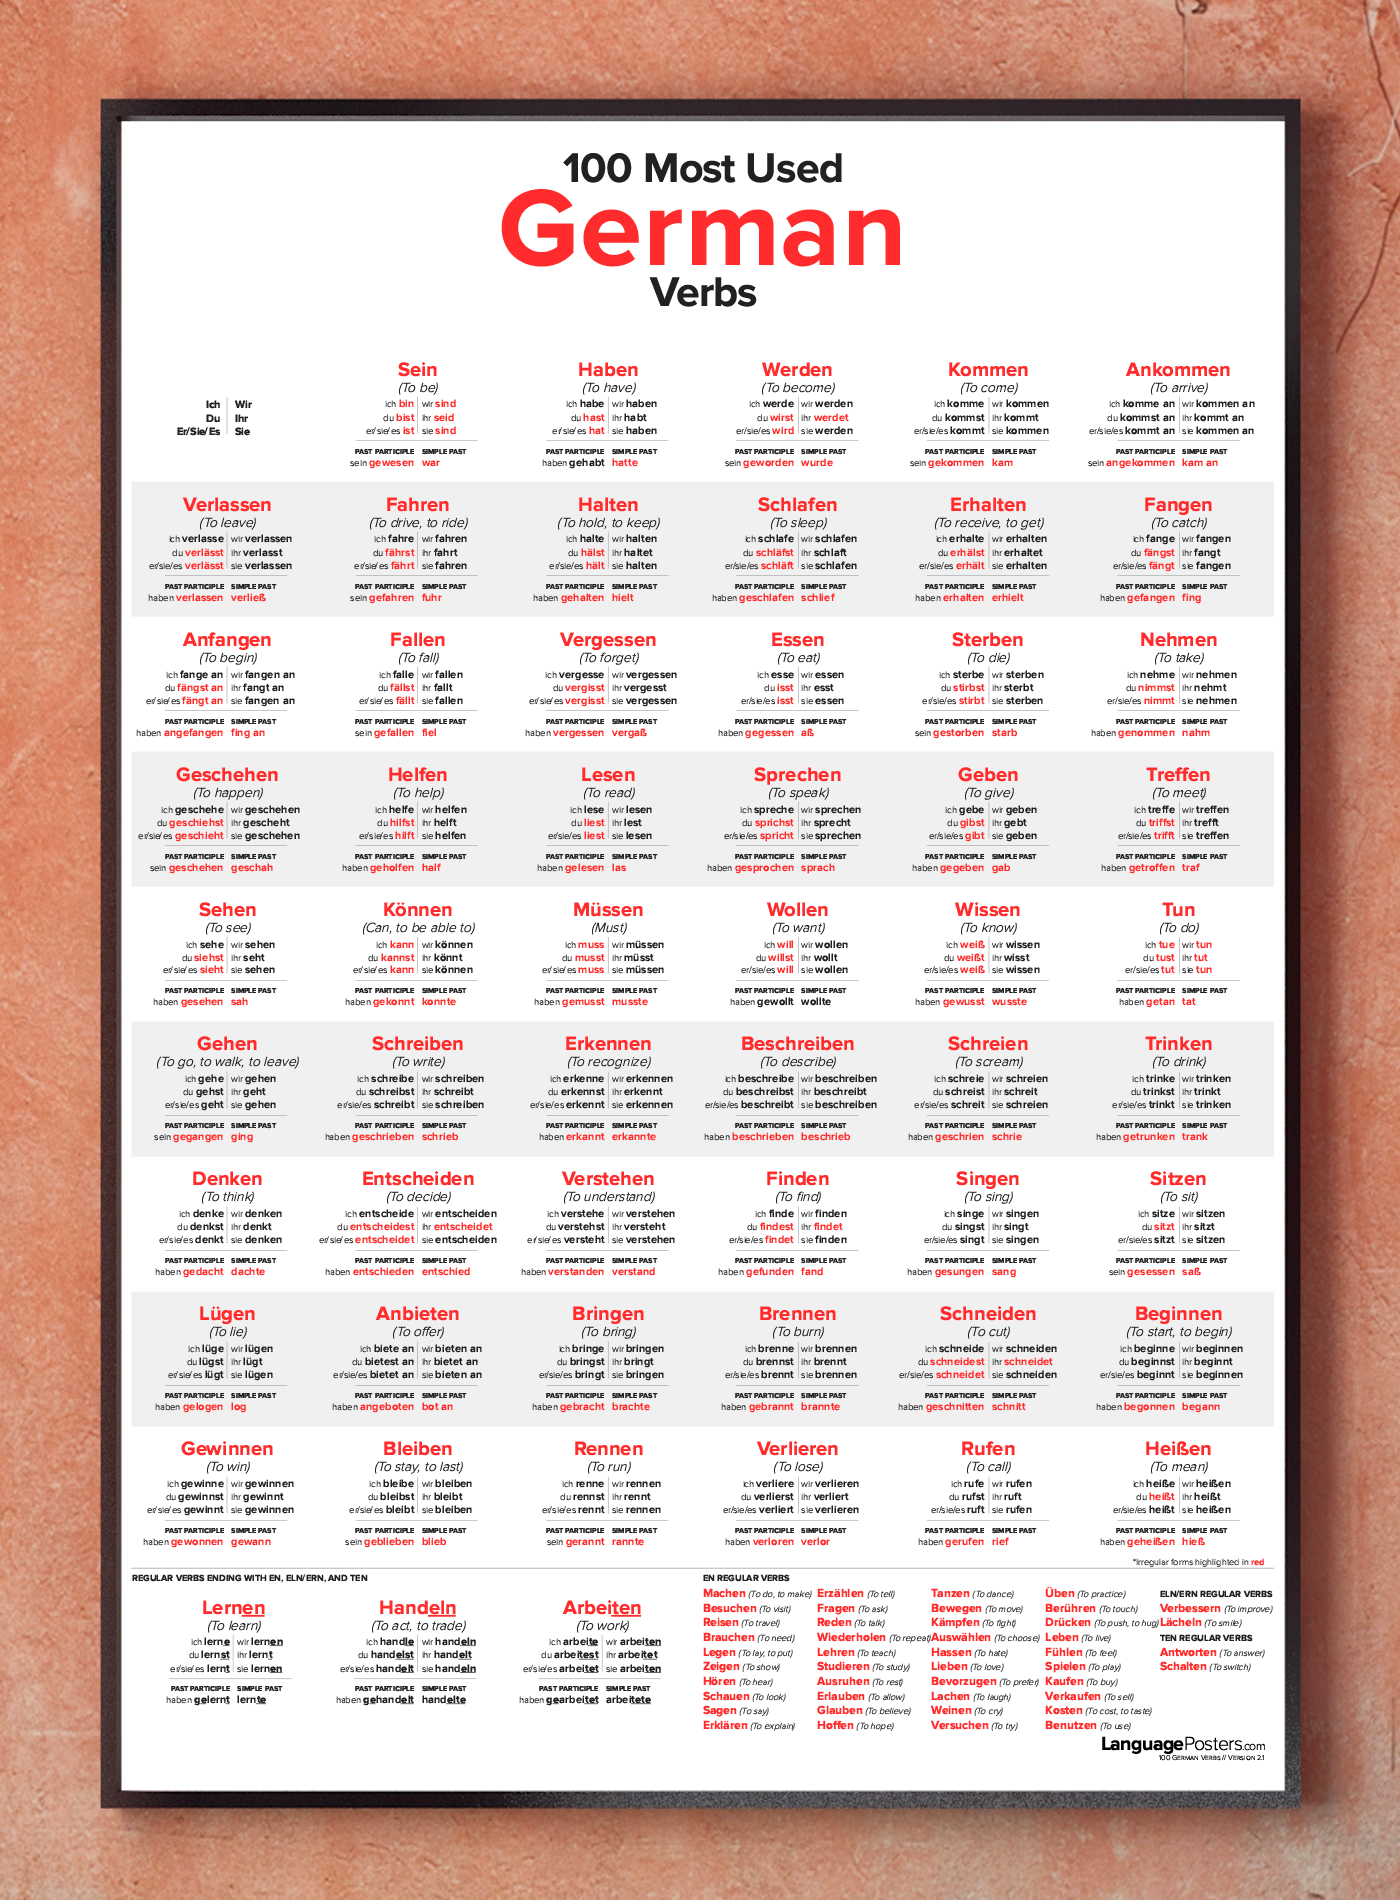 100-most-used-german-verbs-poster-w-study-guide-languageposters